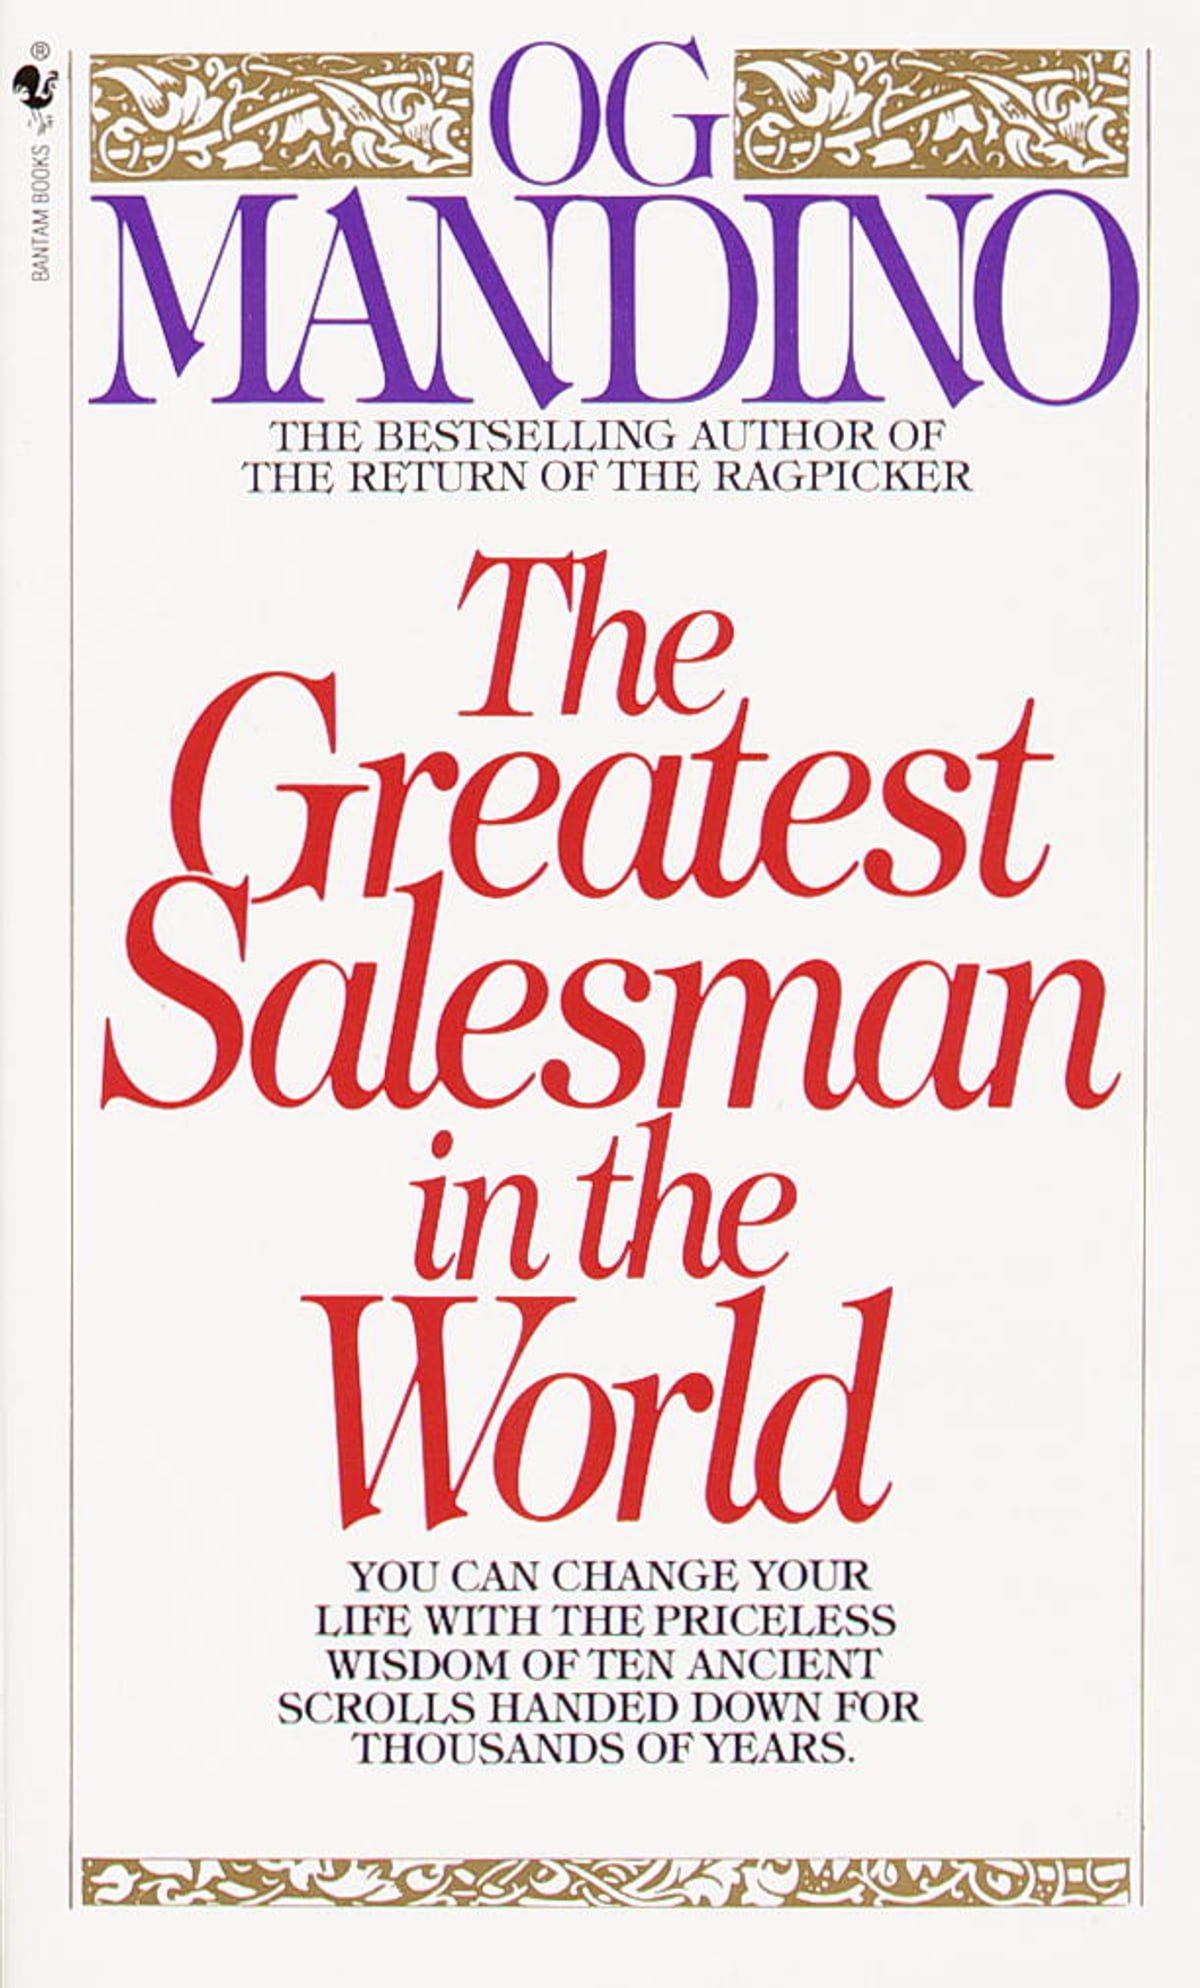 [PDF] The Greatest Salesman in the World by Og Mandino Biblemeal